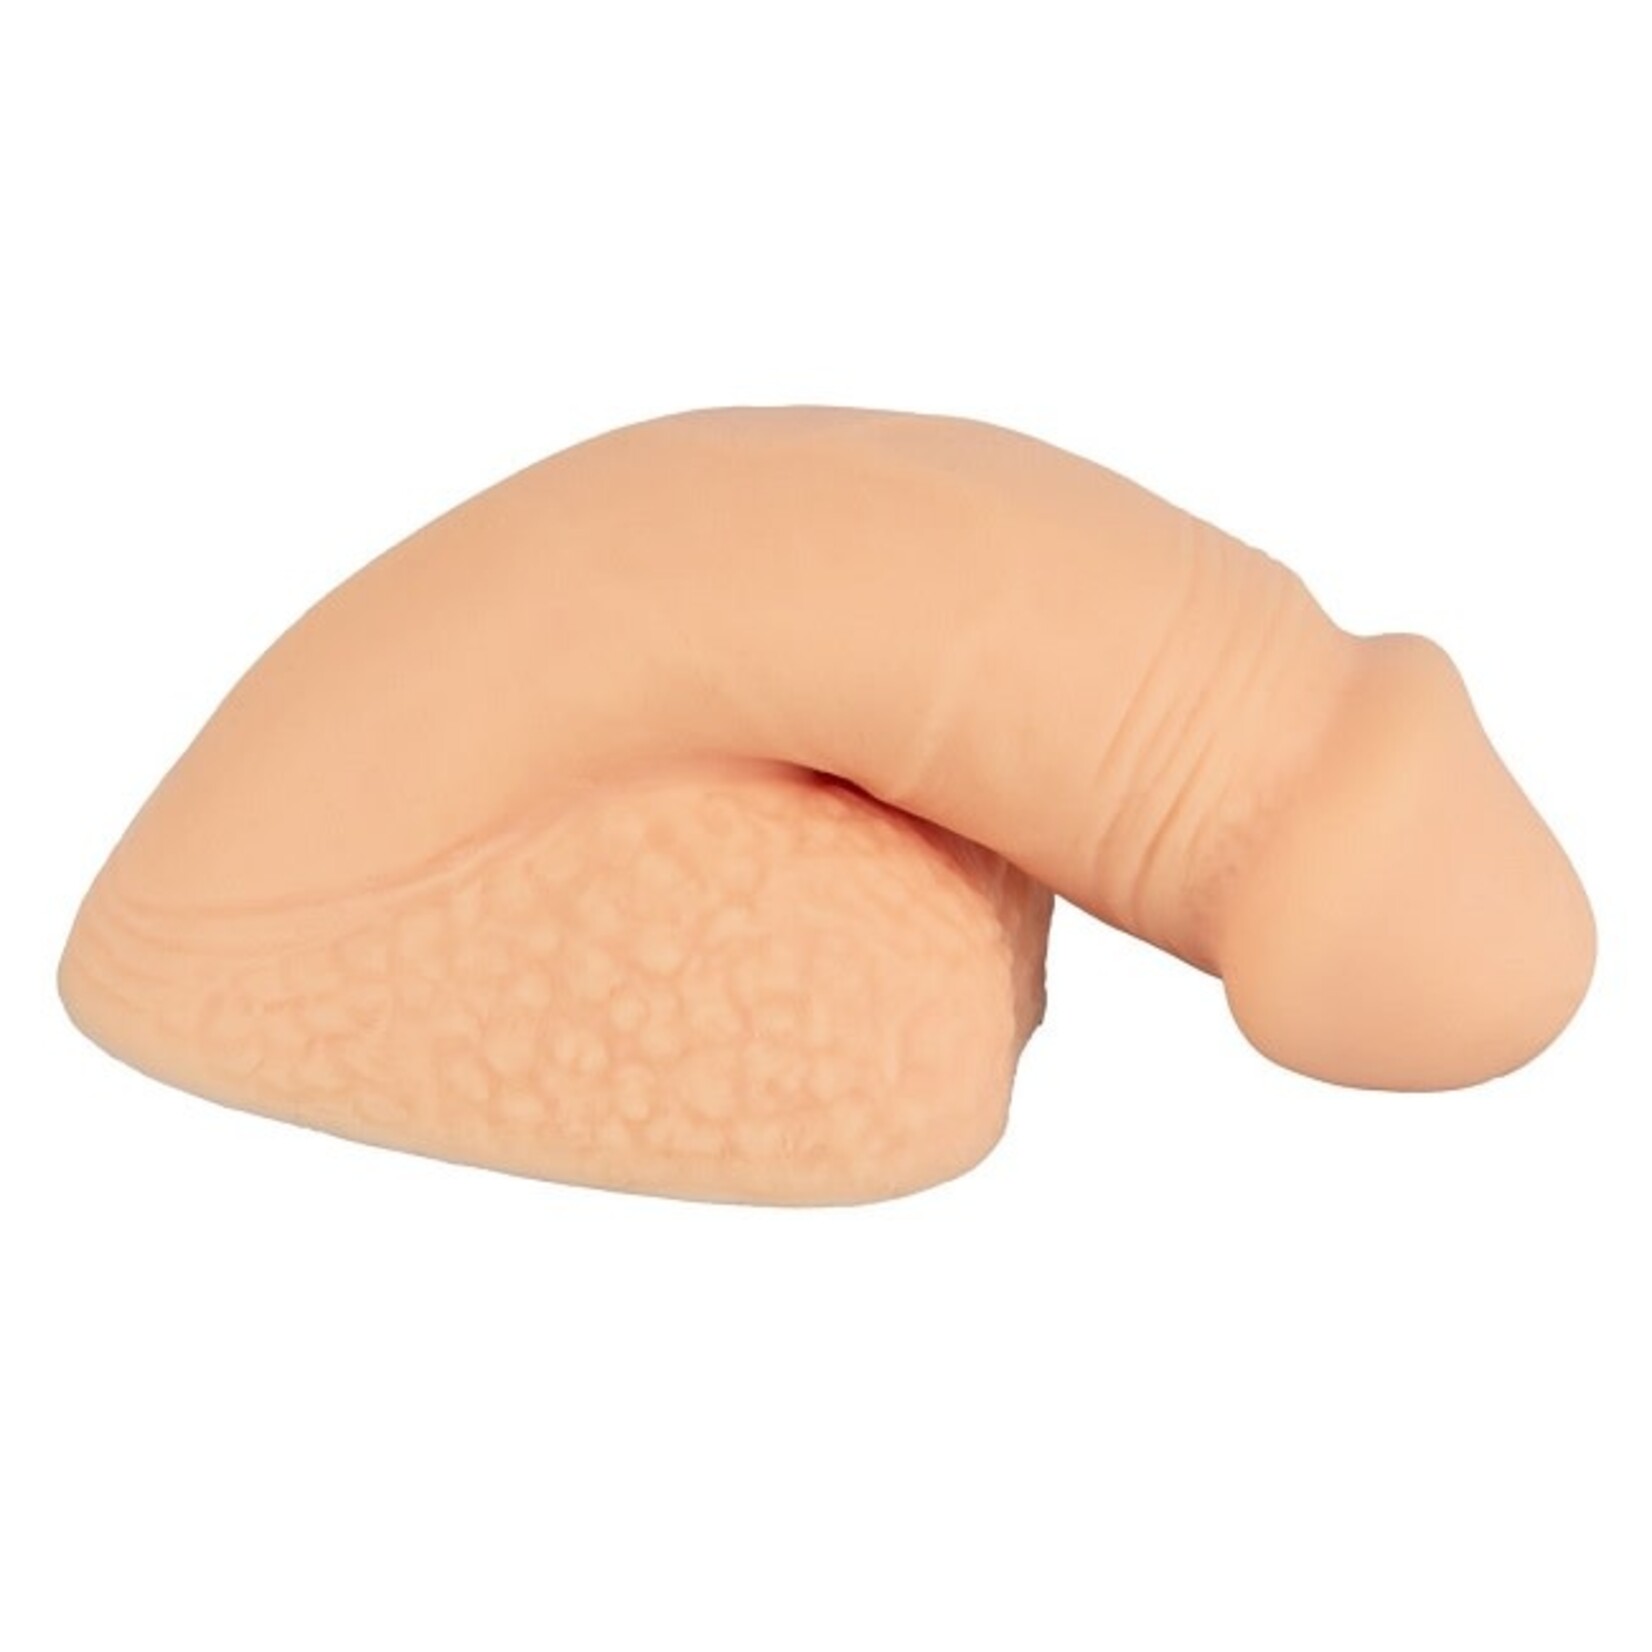 CalExotics Packer Gear 4" Silicone Packing Penis